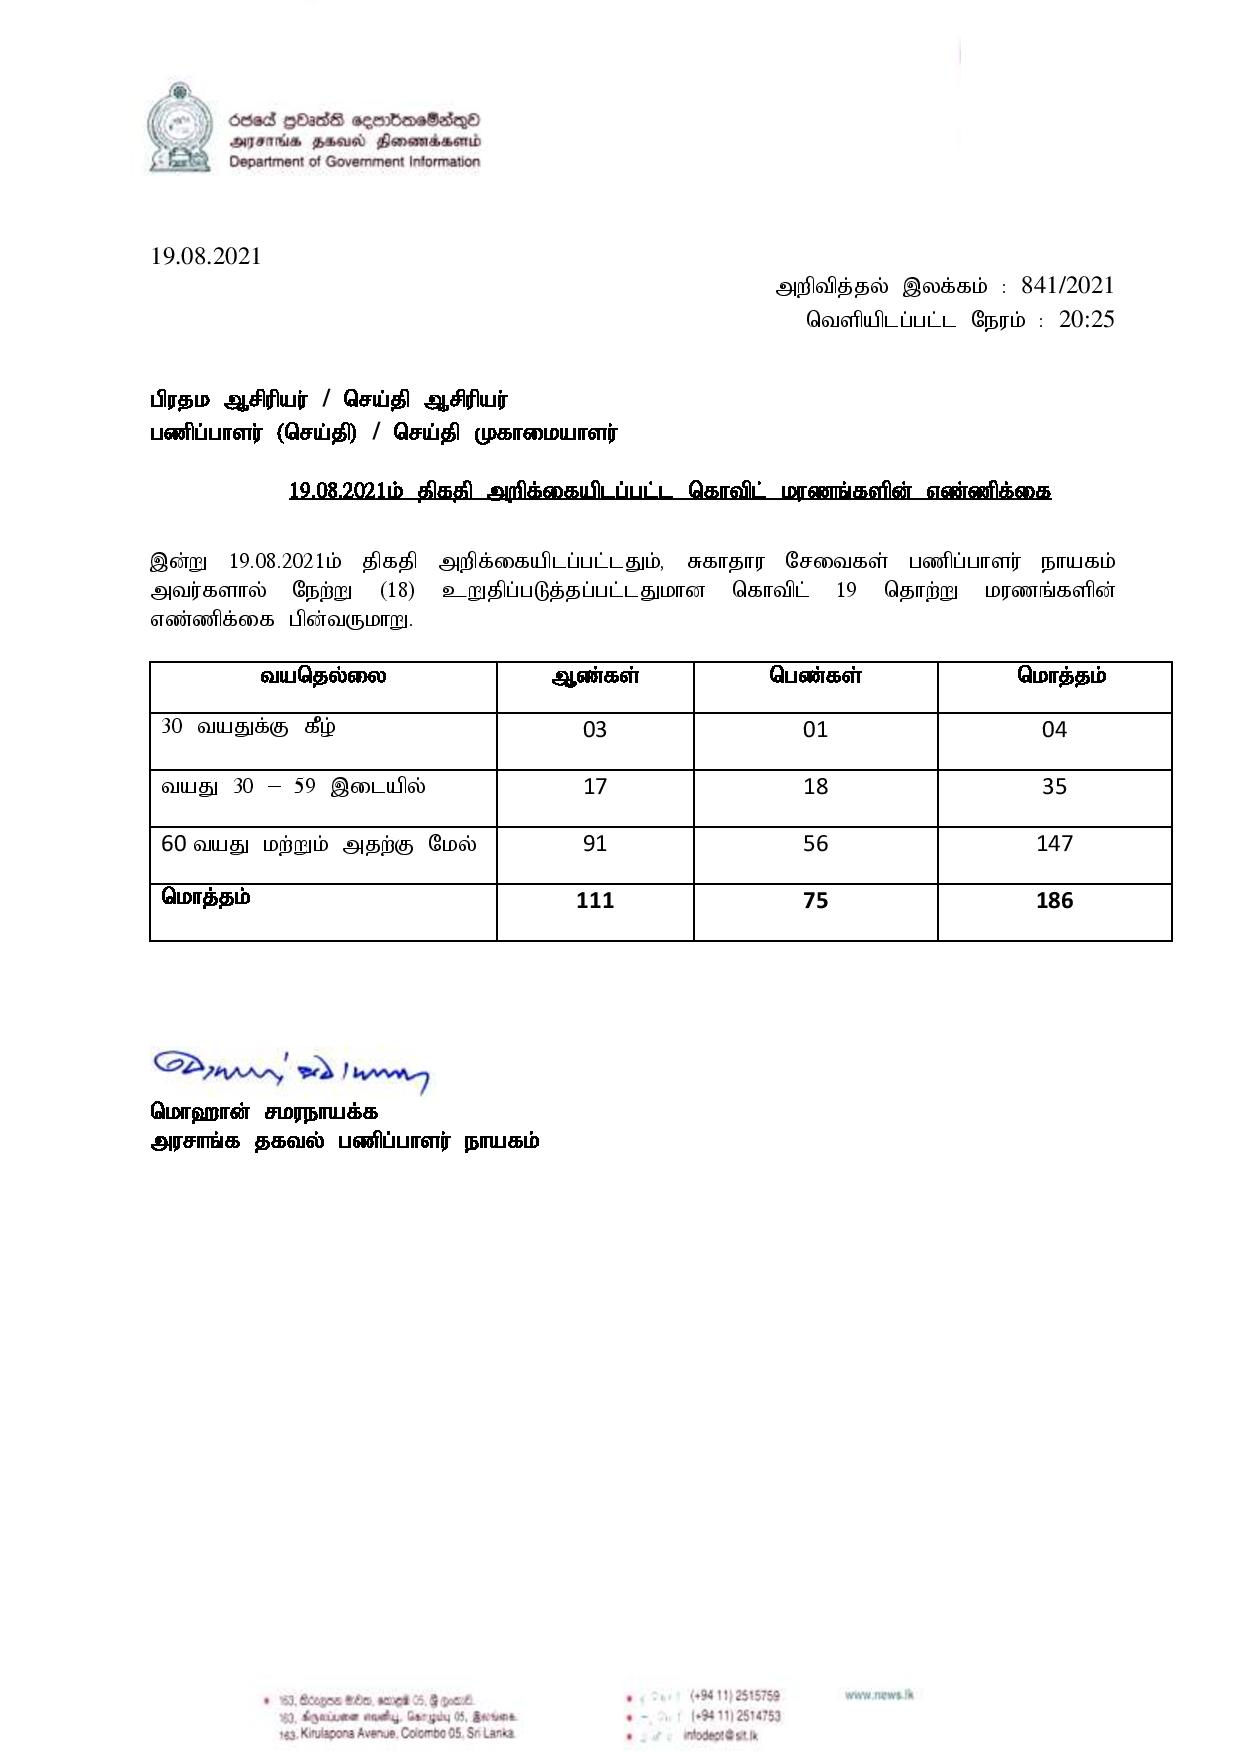 Press Release 841 Tamil 1 page 001